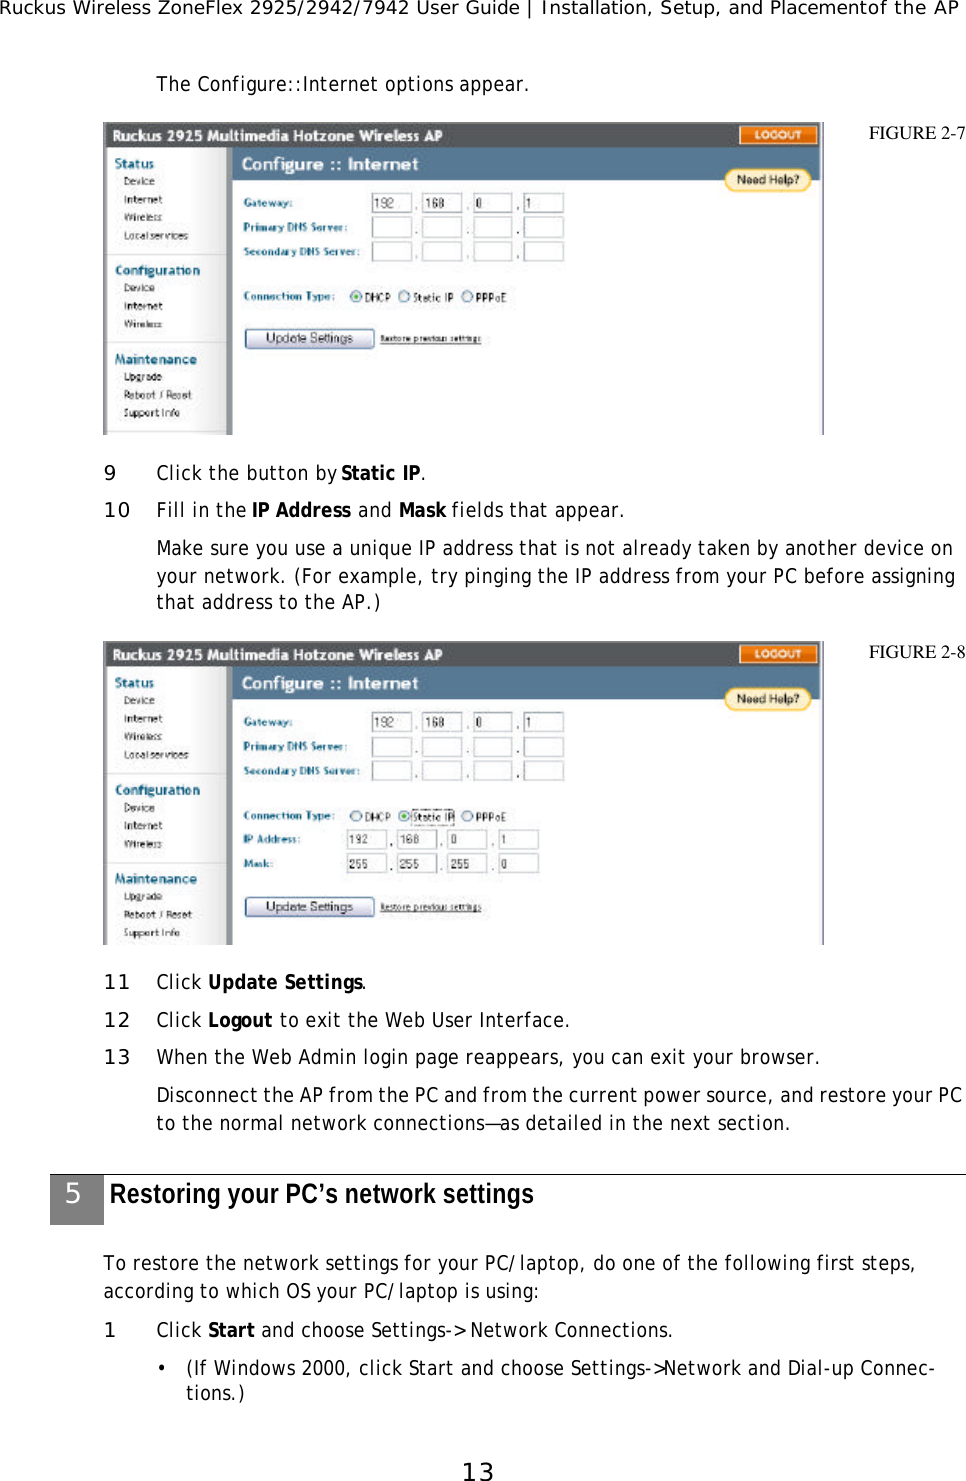 Ruckus Wireless ZoneFlex 2925/2942/7942 User Guide | Installation, Setup, and Placementof the AP13The Configure::Internet options appear. 9Click the button by Static IP.10 Fill in the IP Address and Mask fields that appear.Make sure you use a unique IP address that is not already taken by another device on your network. (For example, try pinging the IP address from your PC before assigning that address to the AP.) 11 Click Update Settings.12 Click Logout to exit the Web User Interface.13 When the Web Admin login page reappears, you can exit your browser.Disconnect the AP from the PC and from the current power source, and restore your PC to the normal network connections—as detailed in the next section. To restore the network settings for your PC/laptop, do one of the following first steps, according to which OS your PC/laptop is using:1Click Start and choose Settings-&gt; Network Connections. •(If Windows 2000, click Start and choose Settings-&gt;Network and Dial-up Connec-tions.)FIGURE 2-7FIGURE 2-85Restoring your PC’s network settings